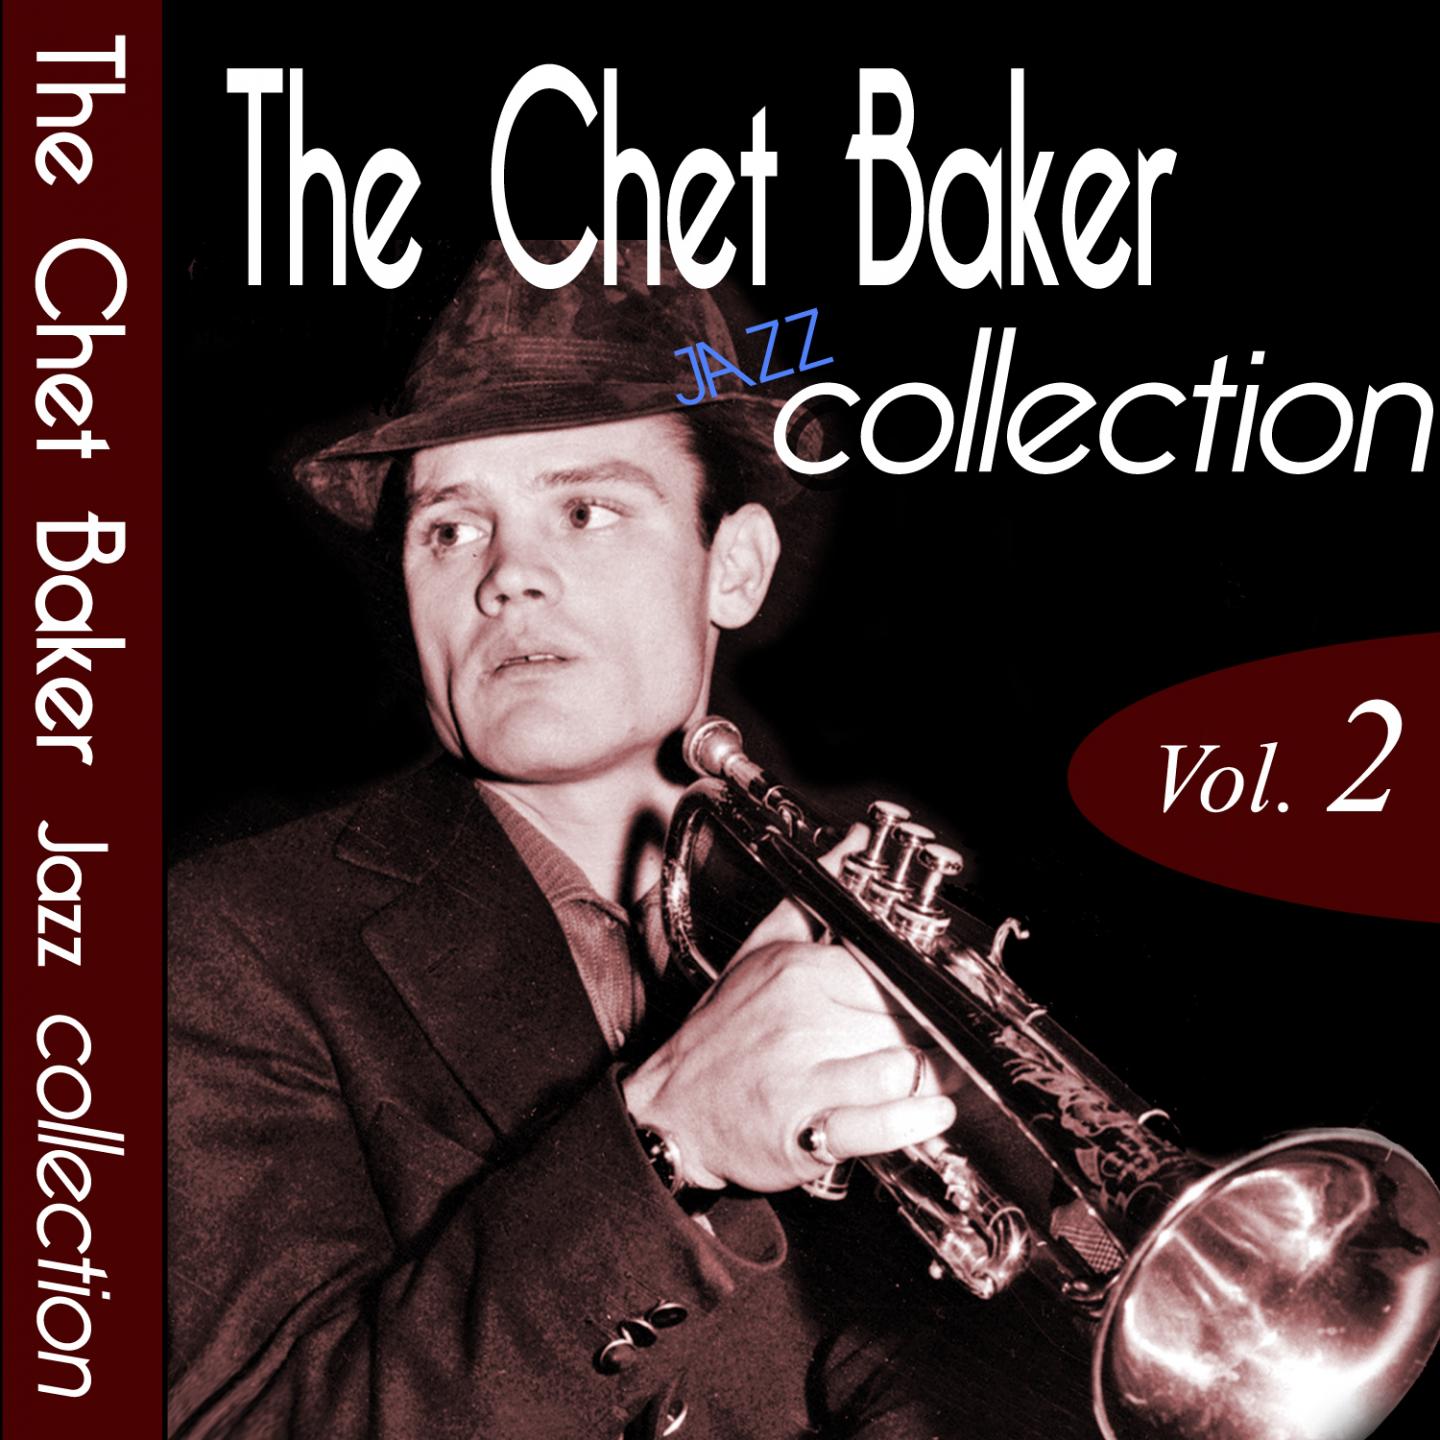 The Chet Baker Jazz Collection, Vol. 2 (Remastered)